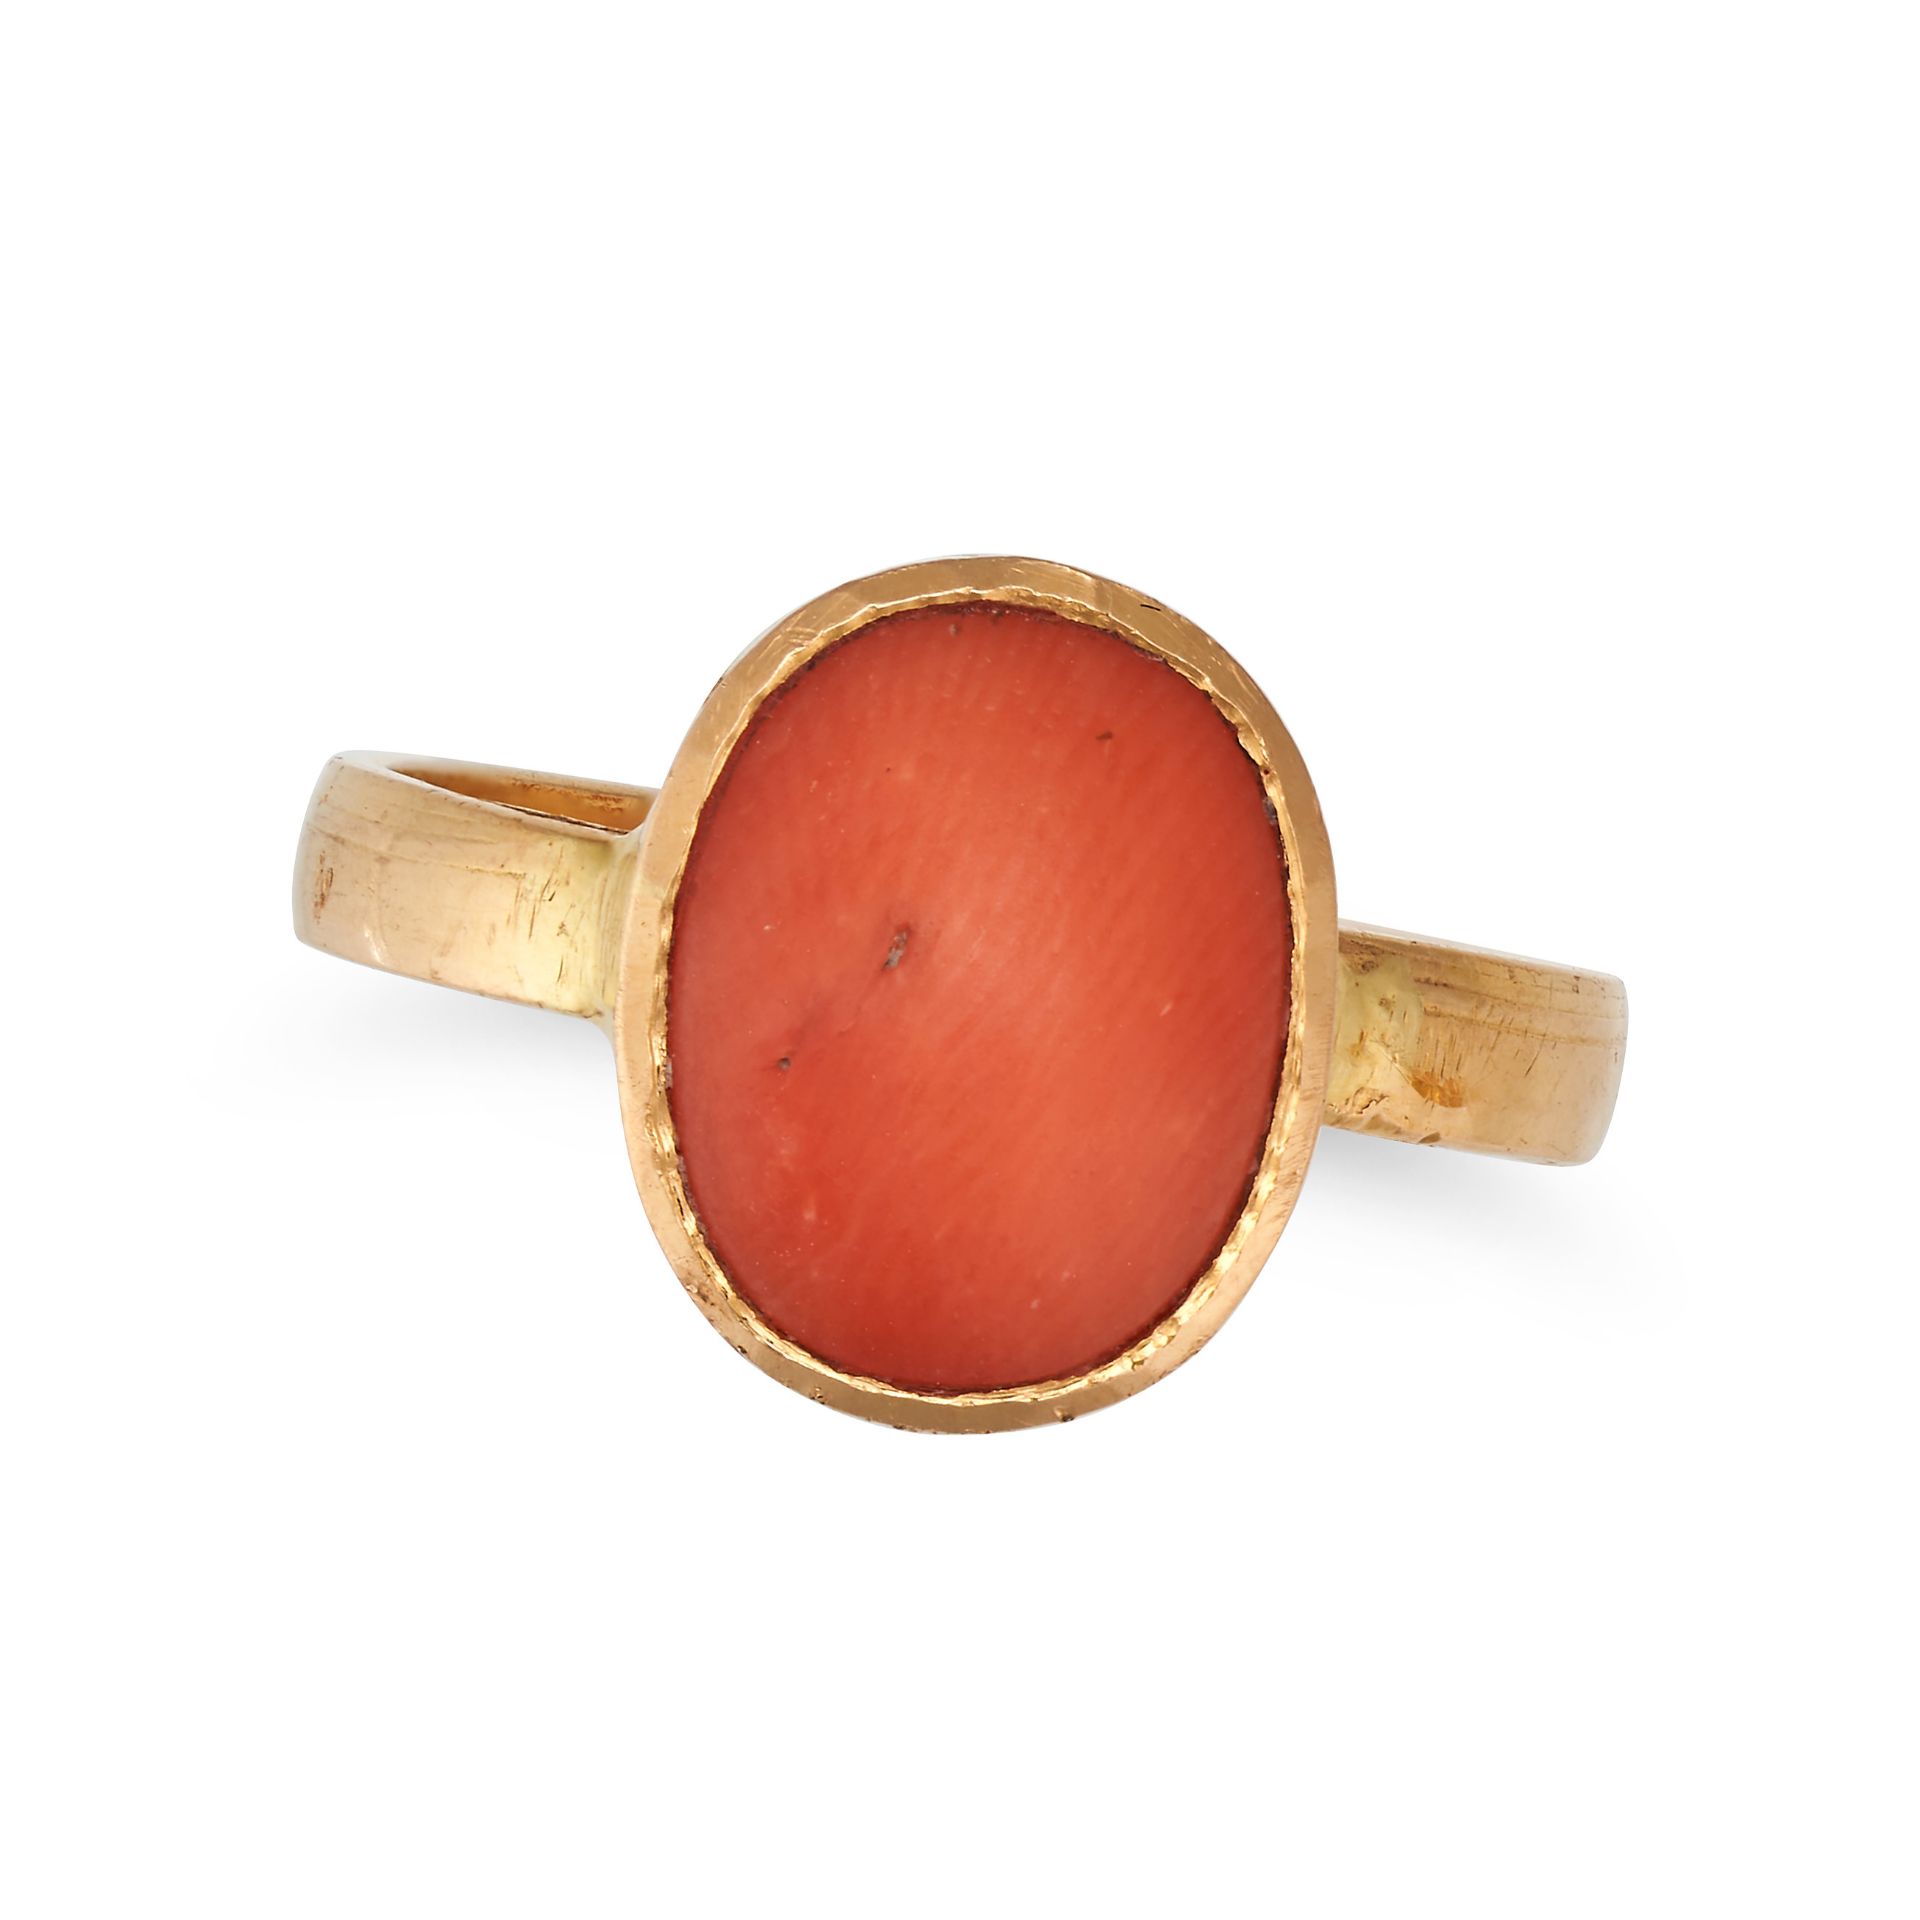 A CORAL RING in 22ct yellow gold, set with a cabochon coral, marked distinctly 916, size K1/2 / 5...